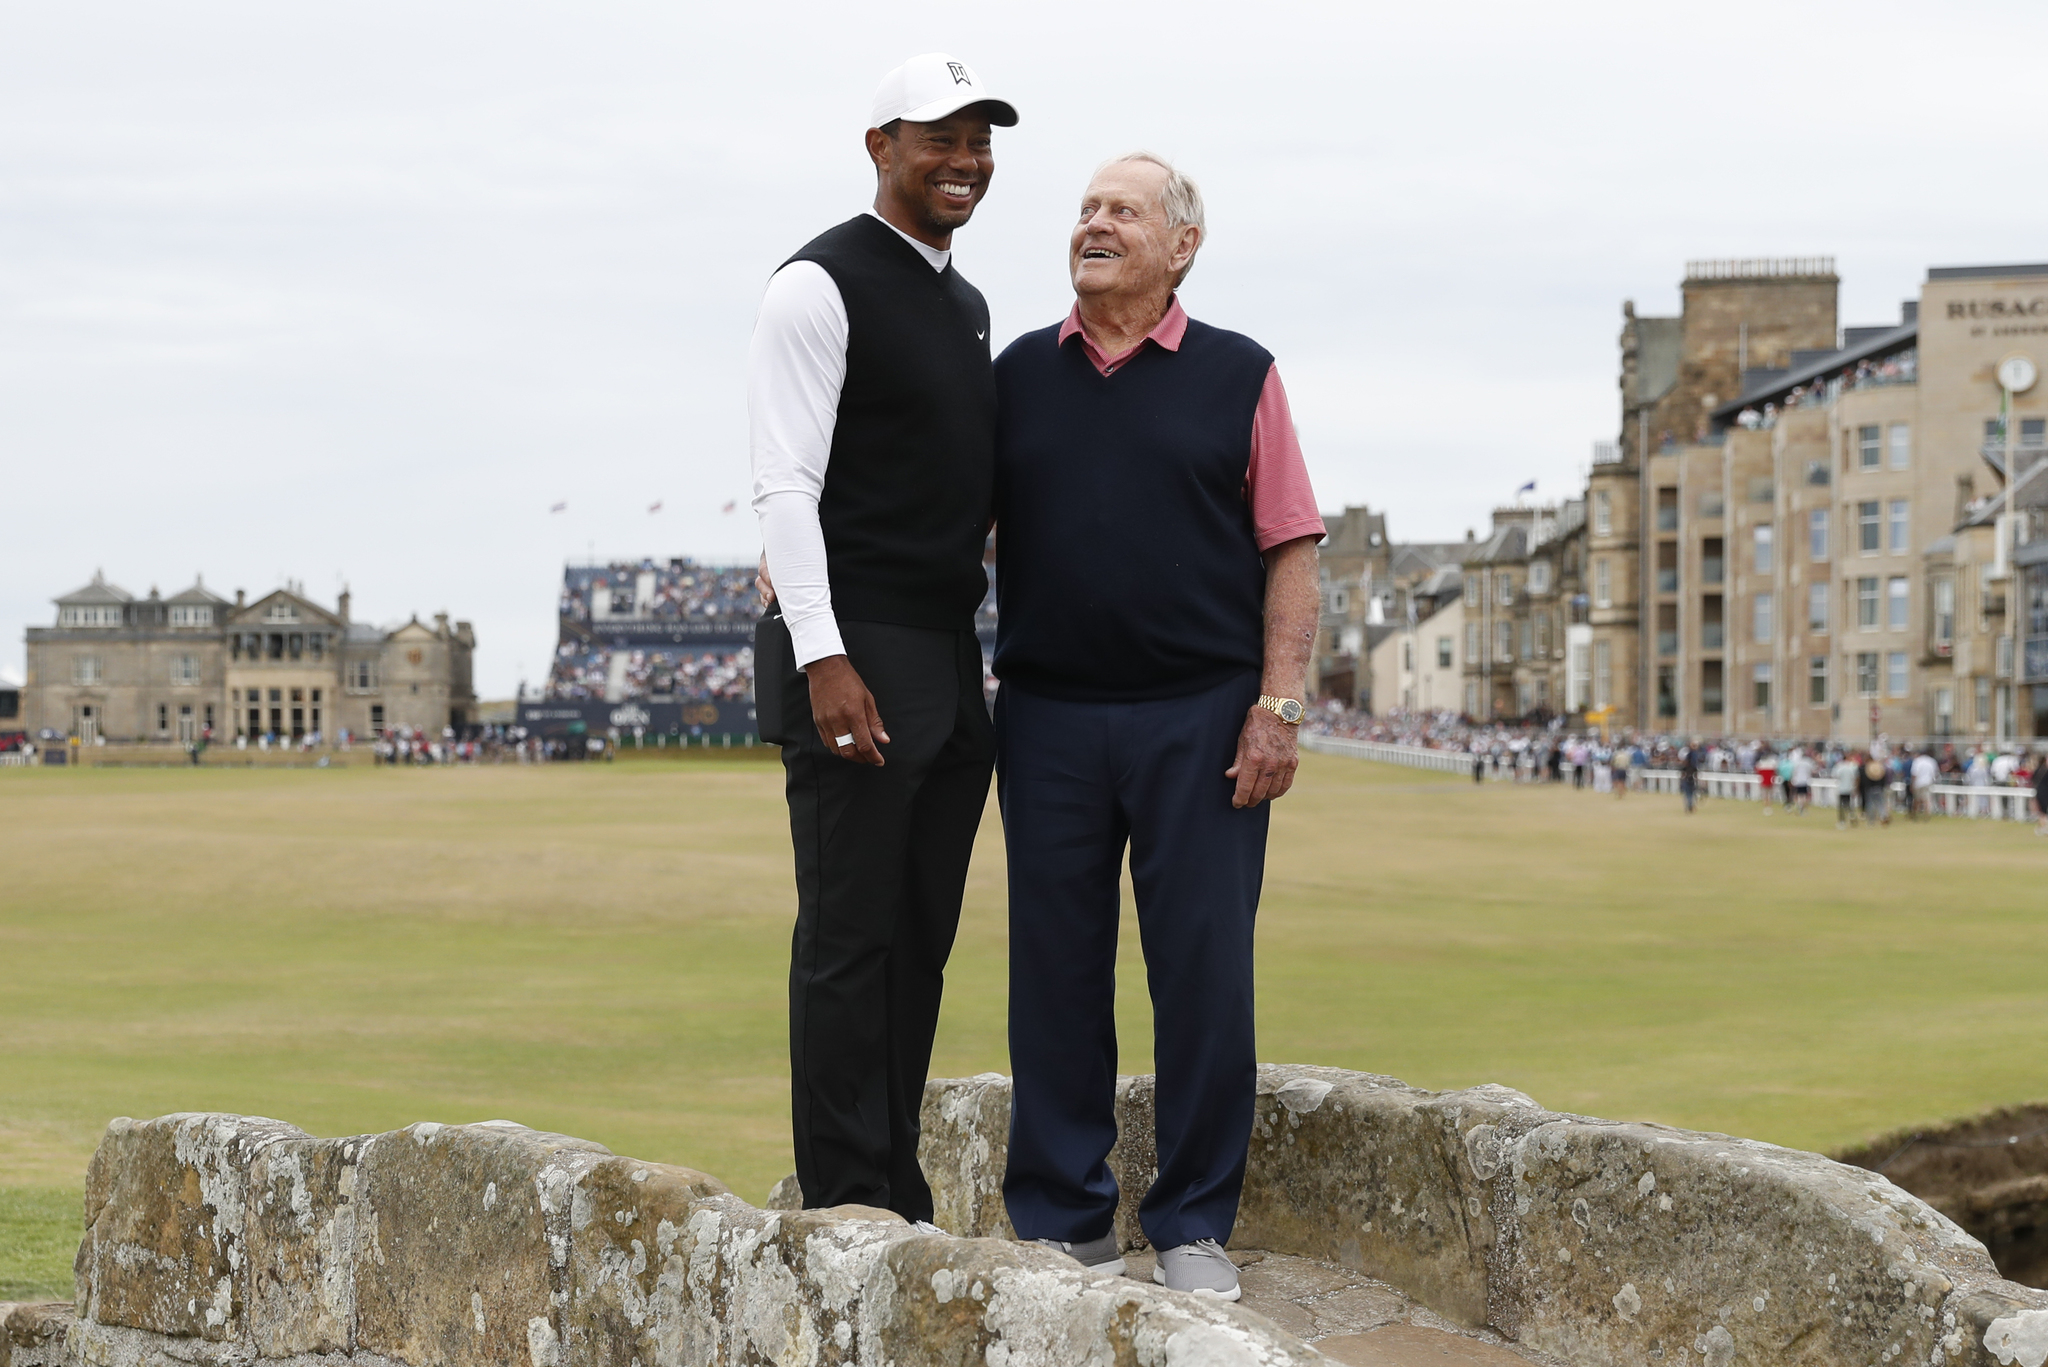 Woods and Nicklaus